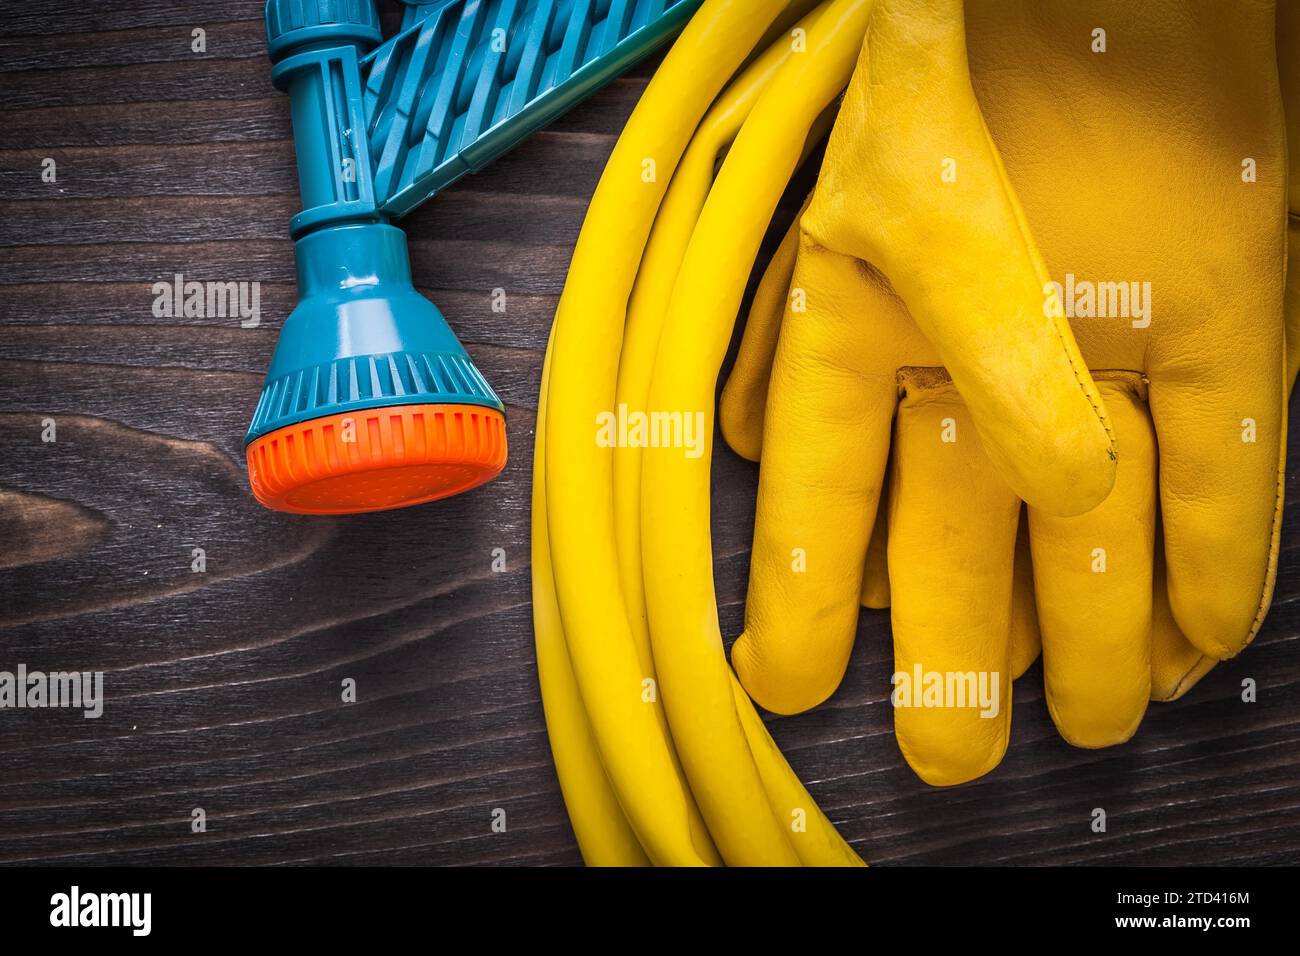 Leather safety gloves and hand spraying hose with water sprinkler on vintage wooden surface farming concept Stock Photo